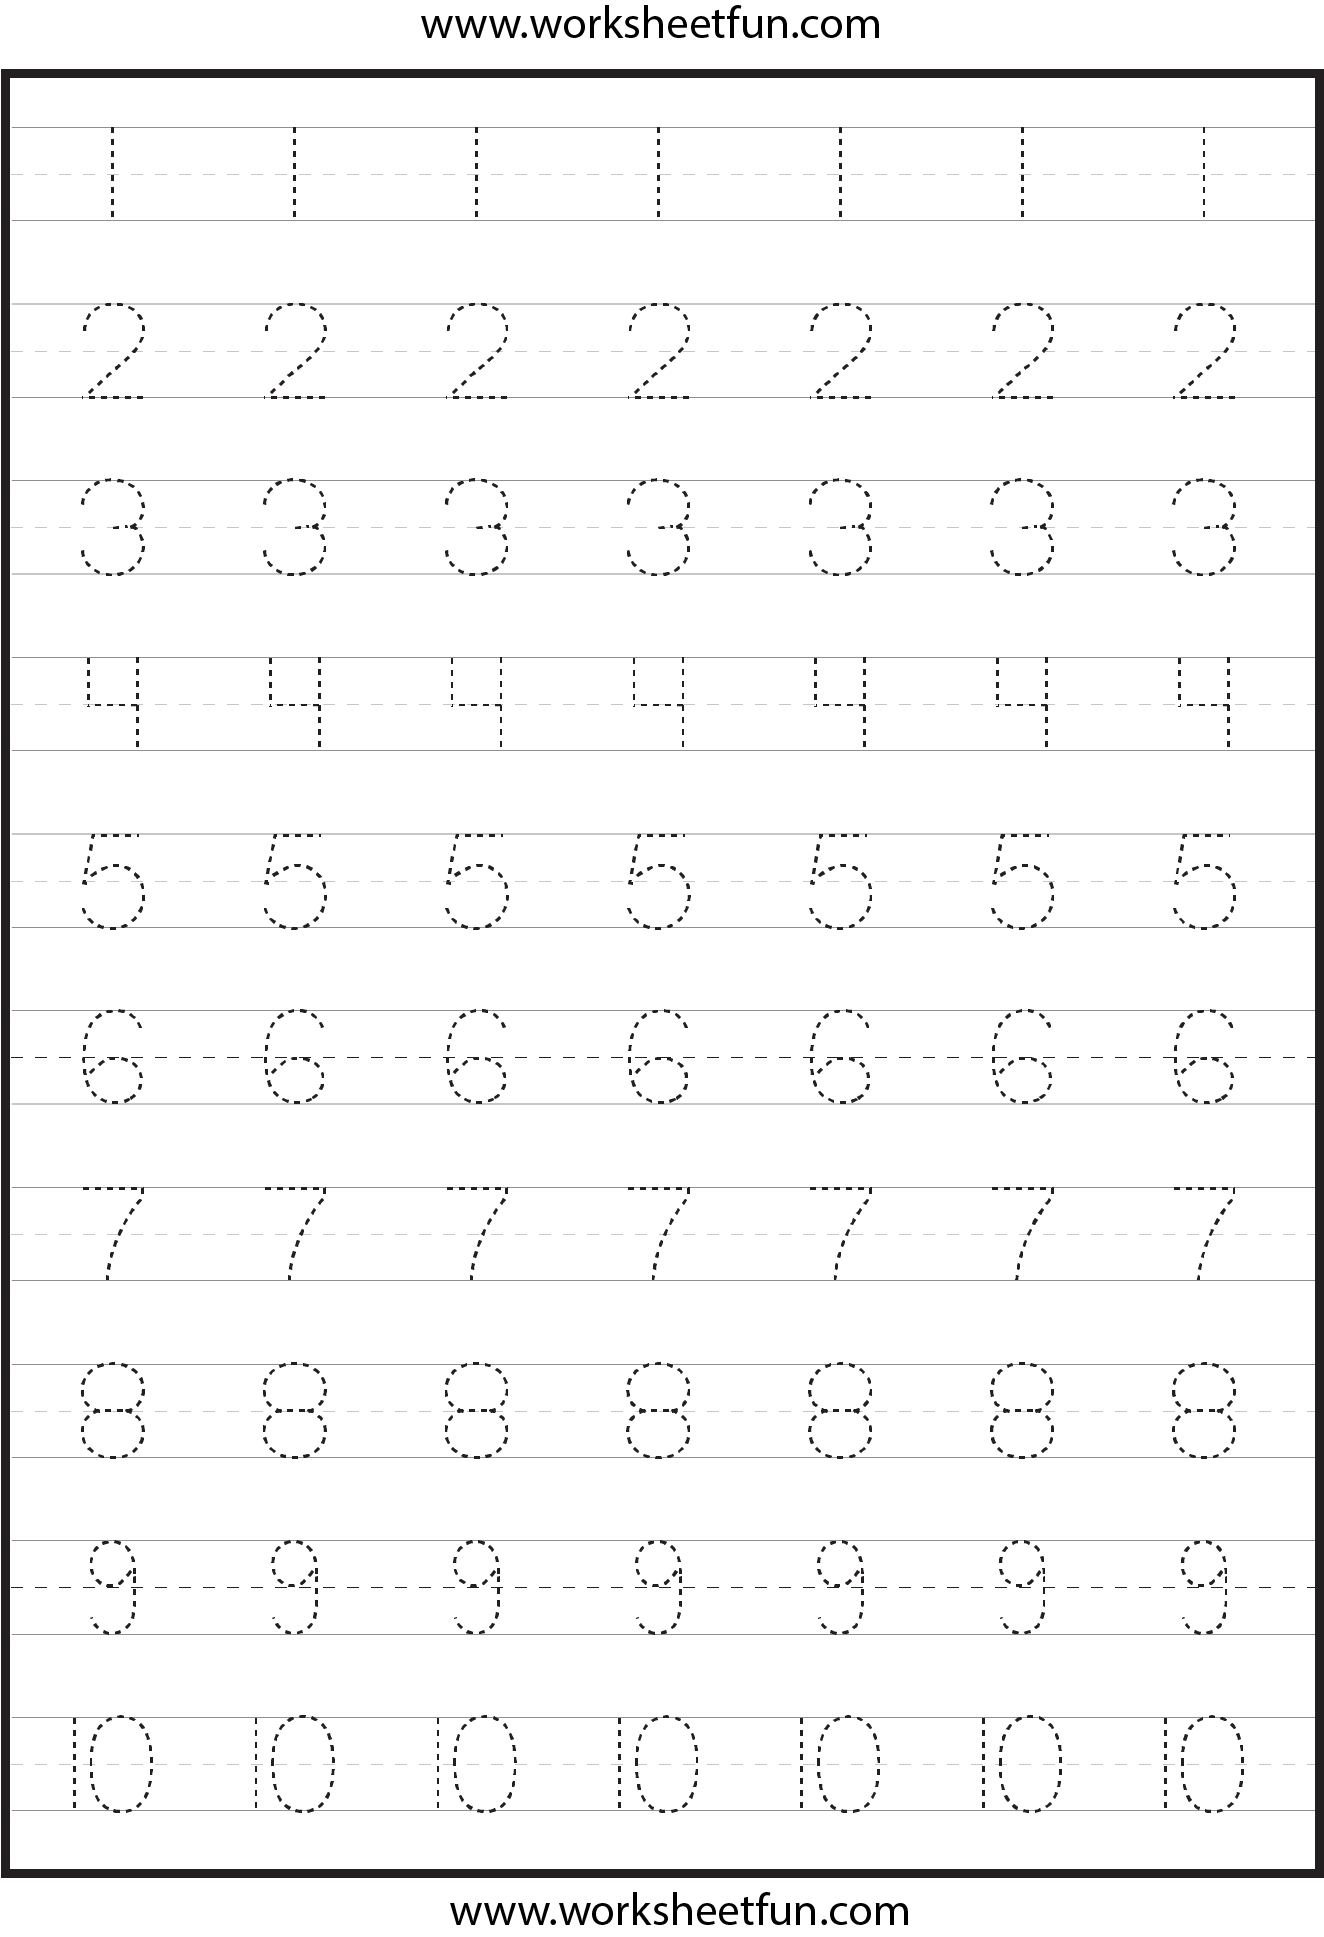 11 Images of Fun Number Worksheets